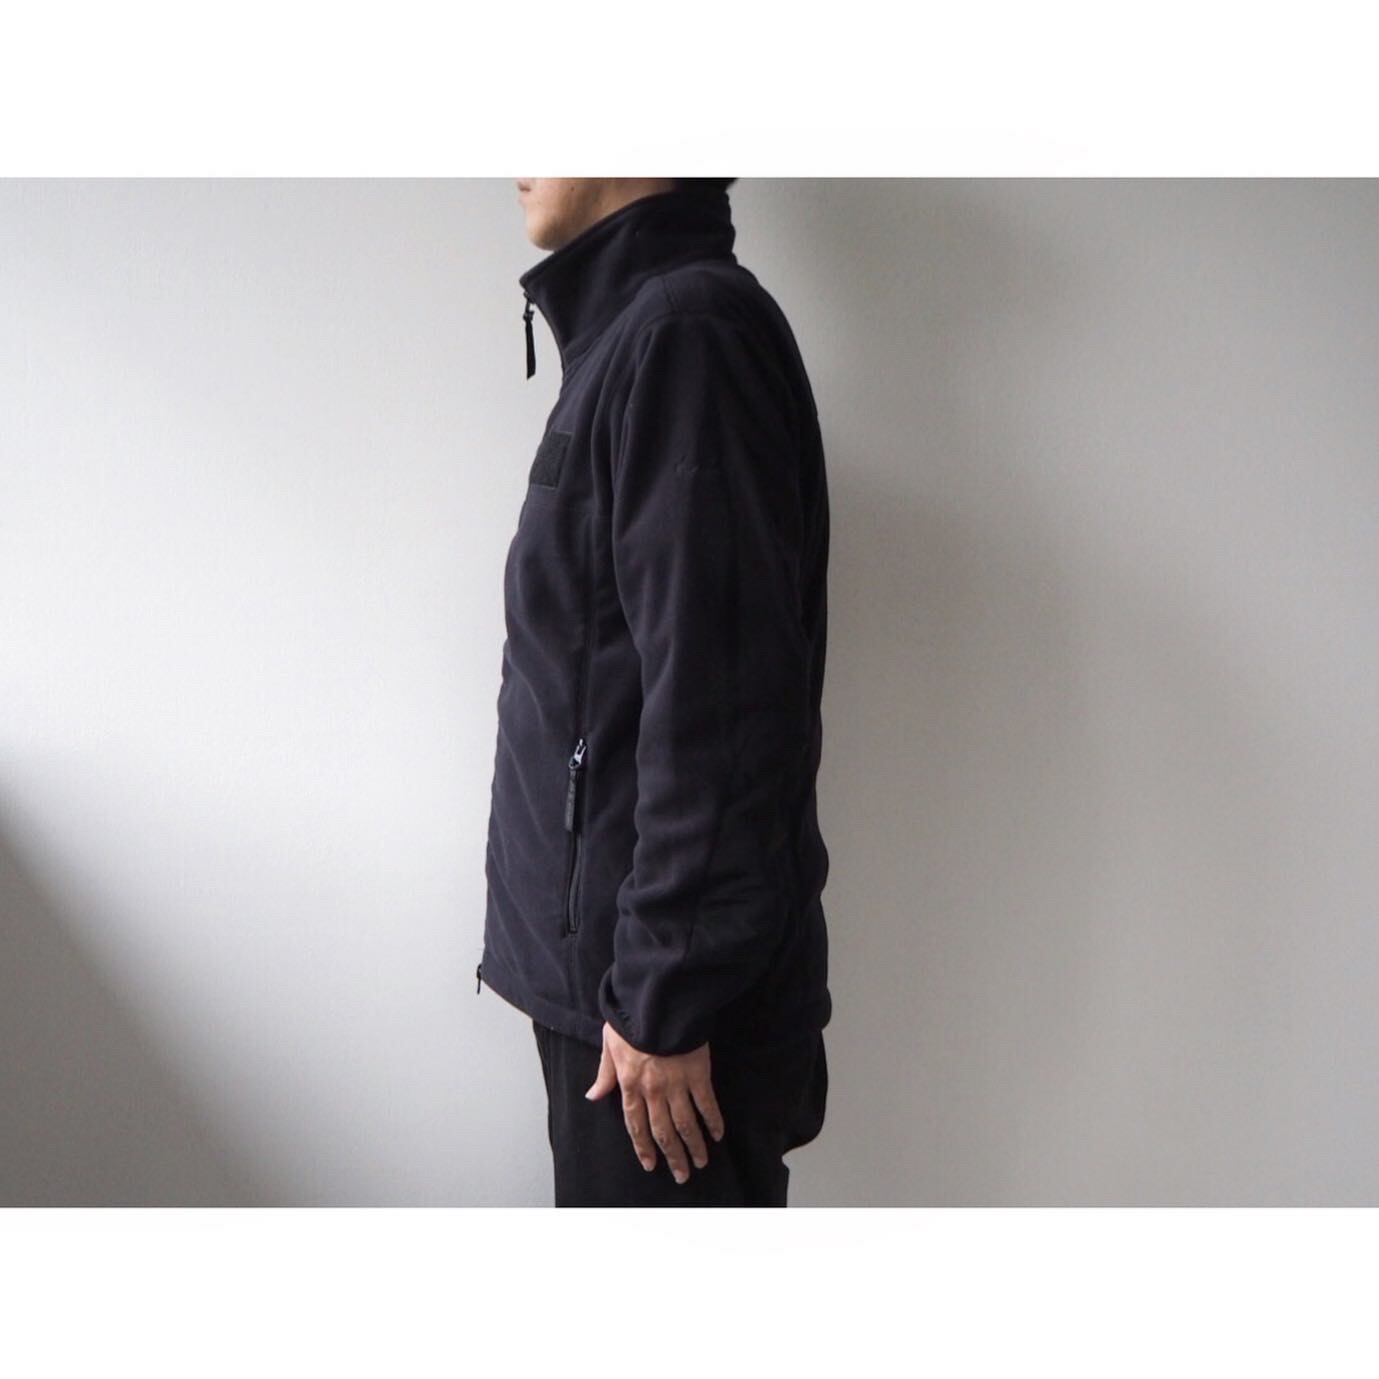 WILD THINGS (ワイルドシングス) POLARTEC WIND JACKET | AUTHENTIC Life Store powered  by BASE